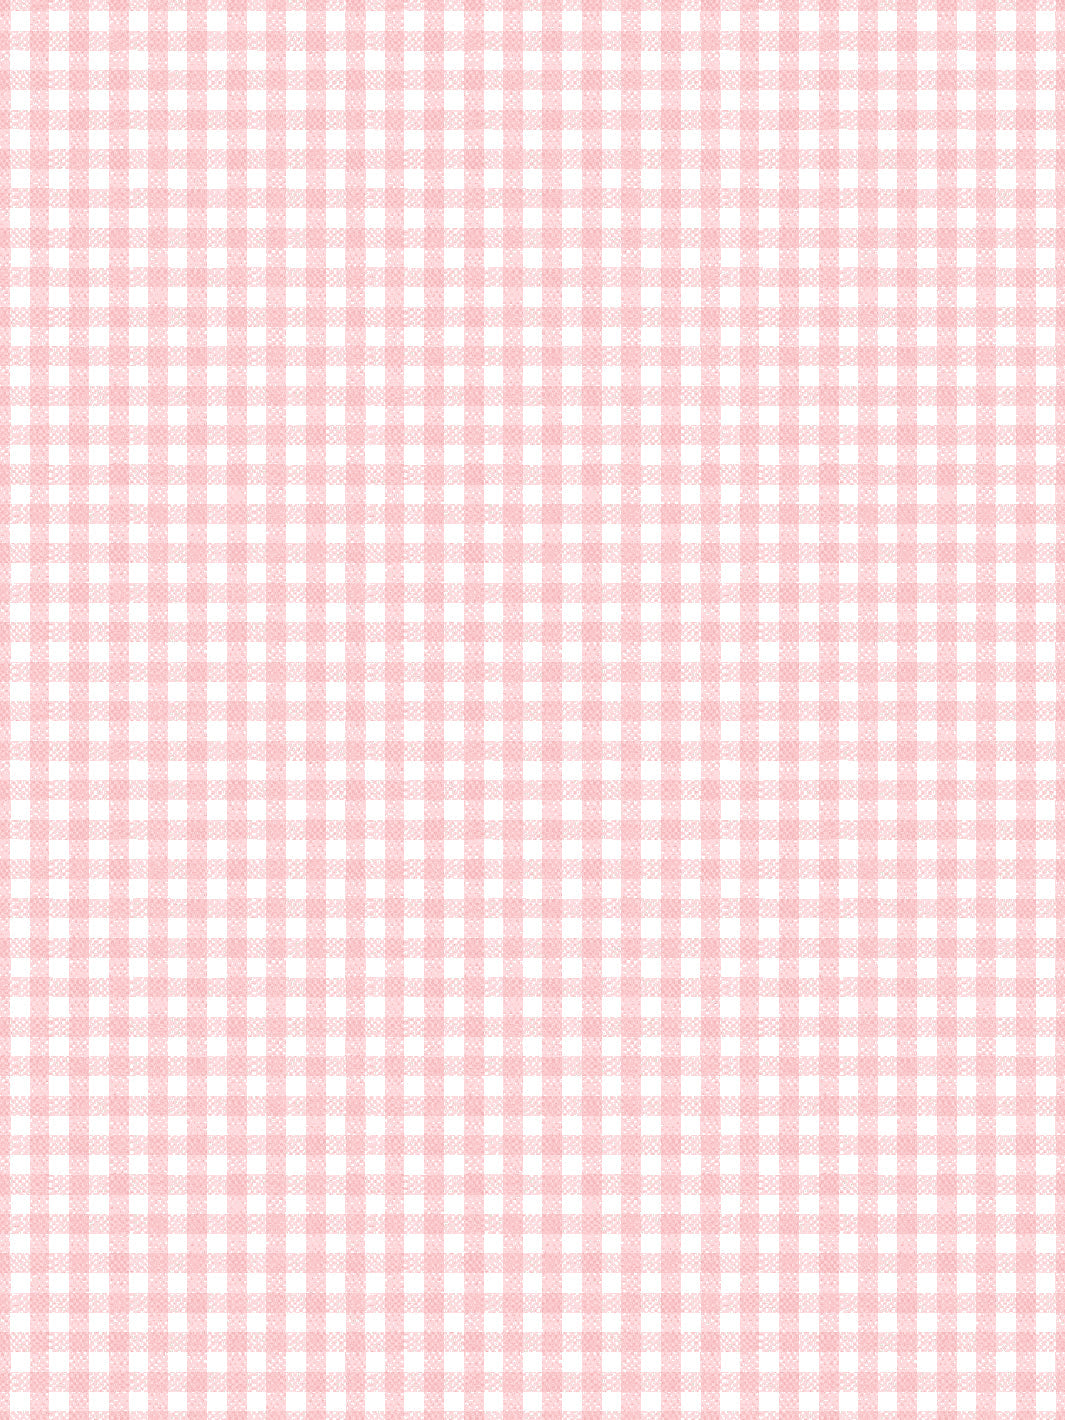 'Pixie Gingham' Wallpaper by Sarah Jessica Parker - Pink